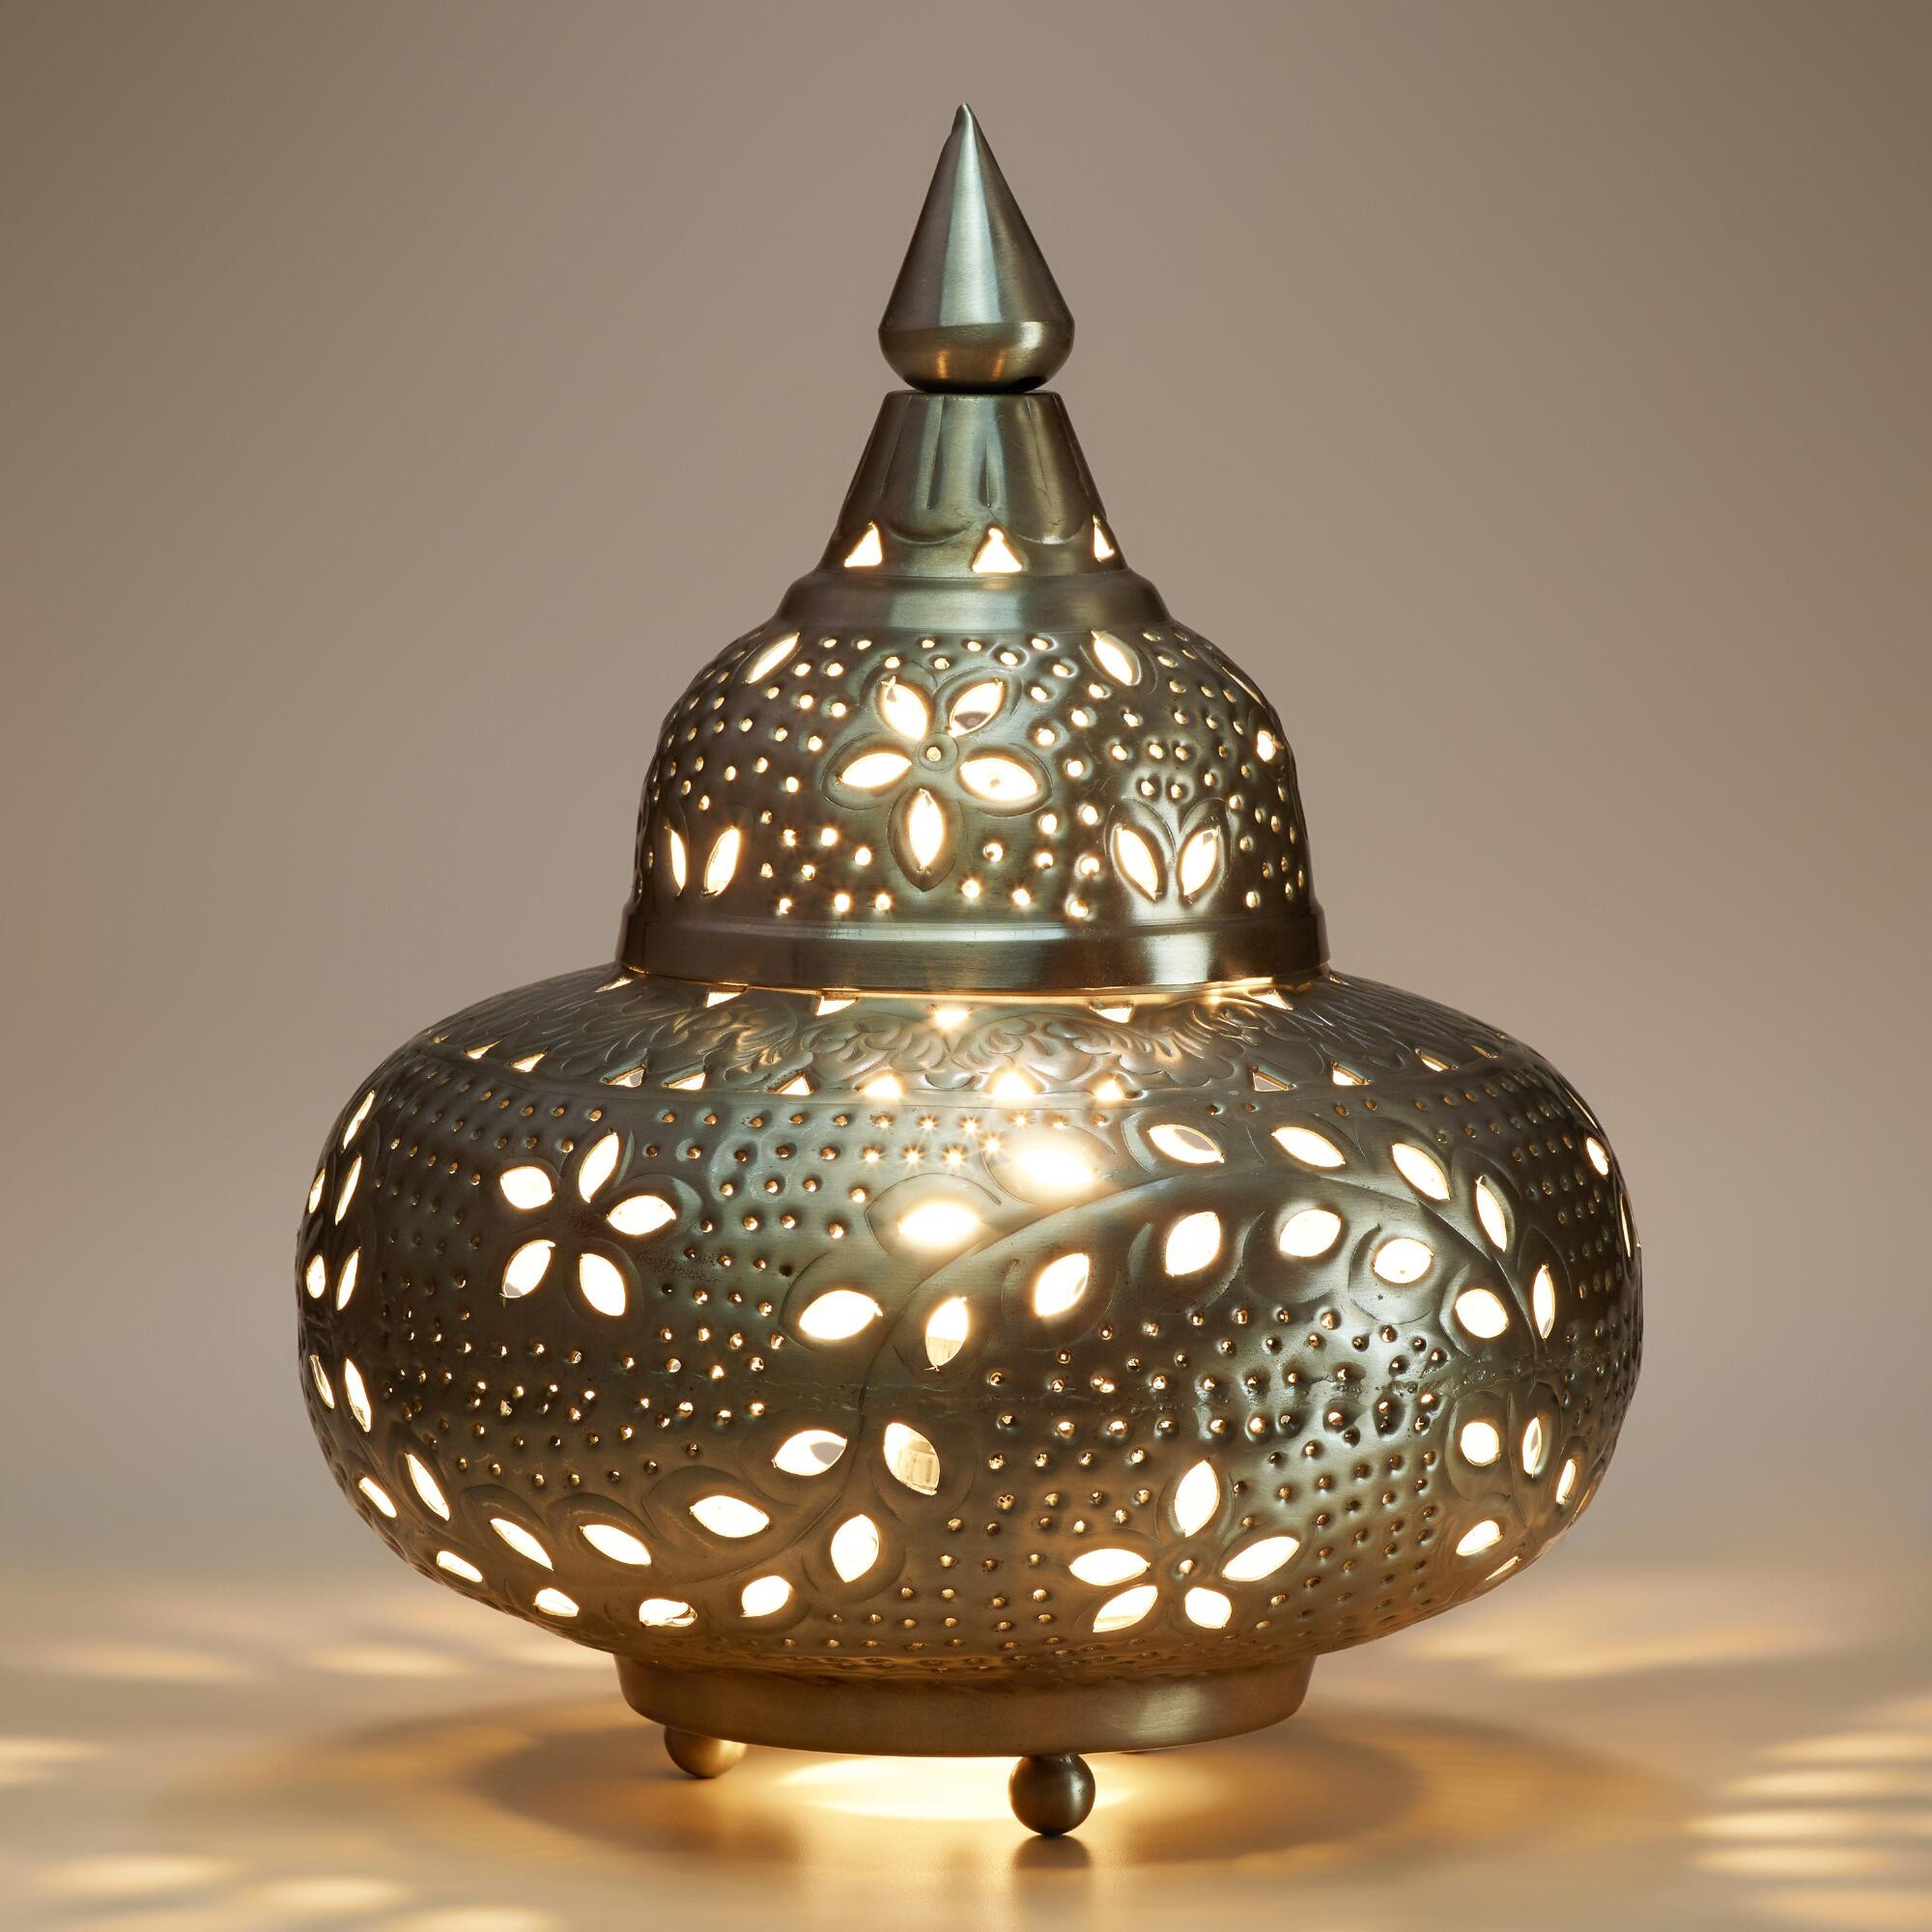 Orientalische Lampen
 Small Moroccan Punched Metal Lamp